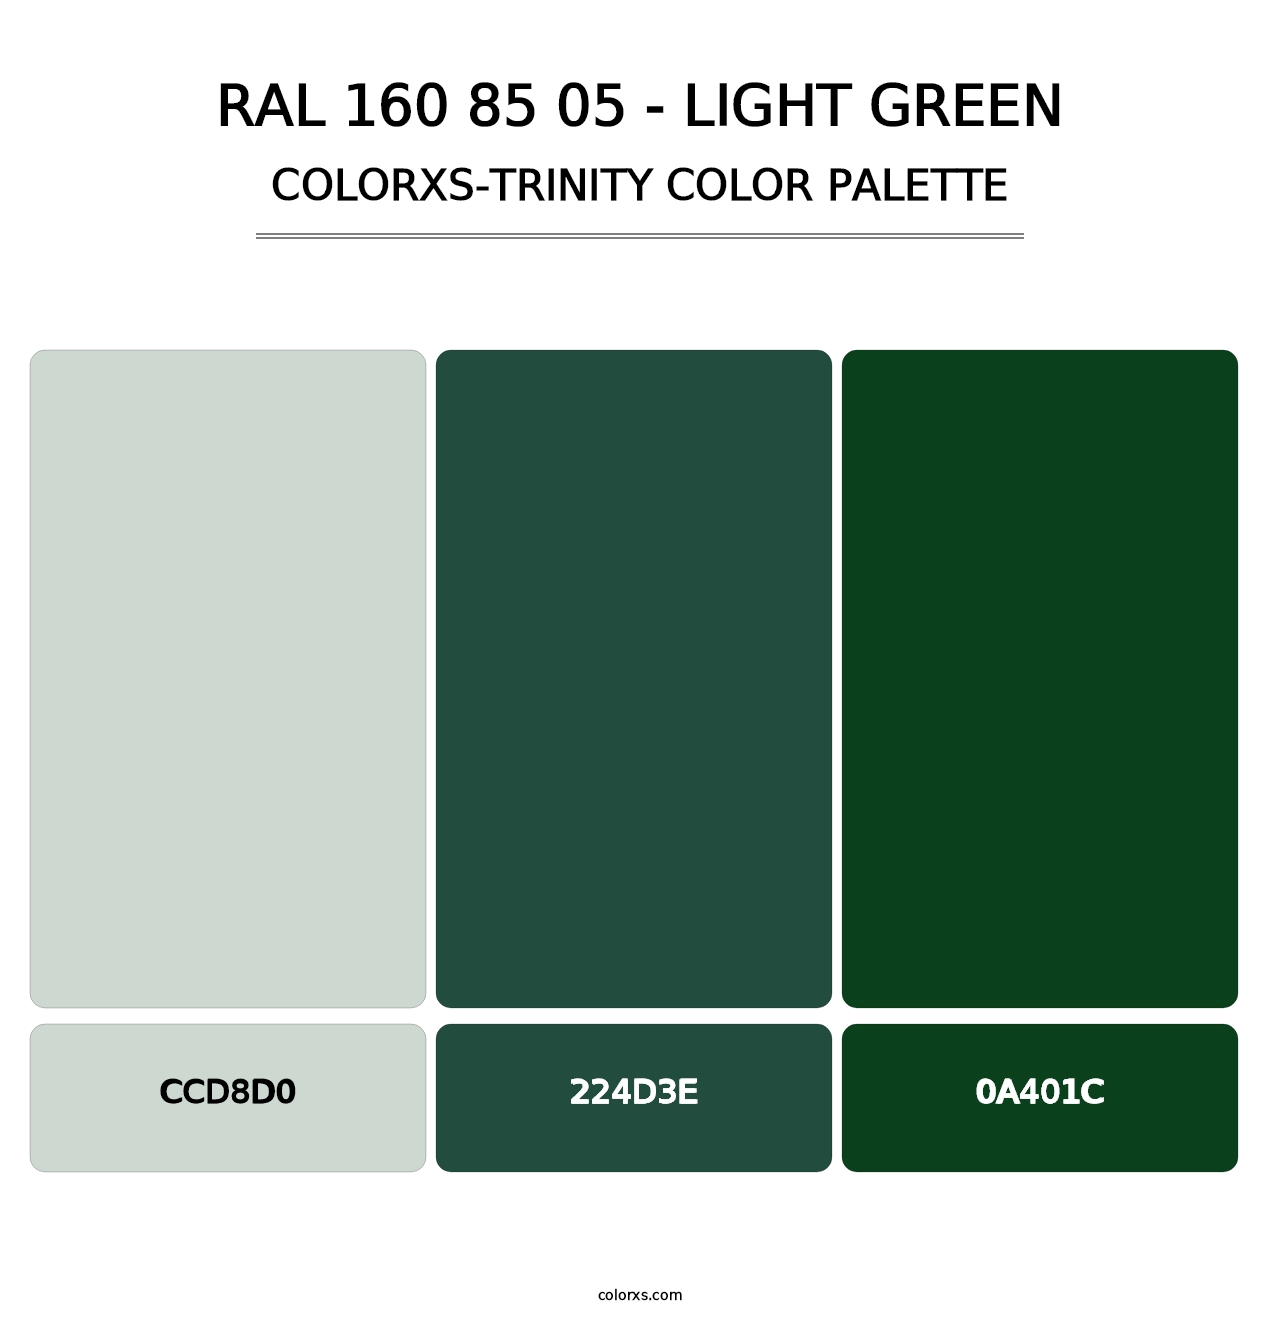 RAL 160 85 05 - Light Green - Colorxs Trinity Palette